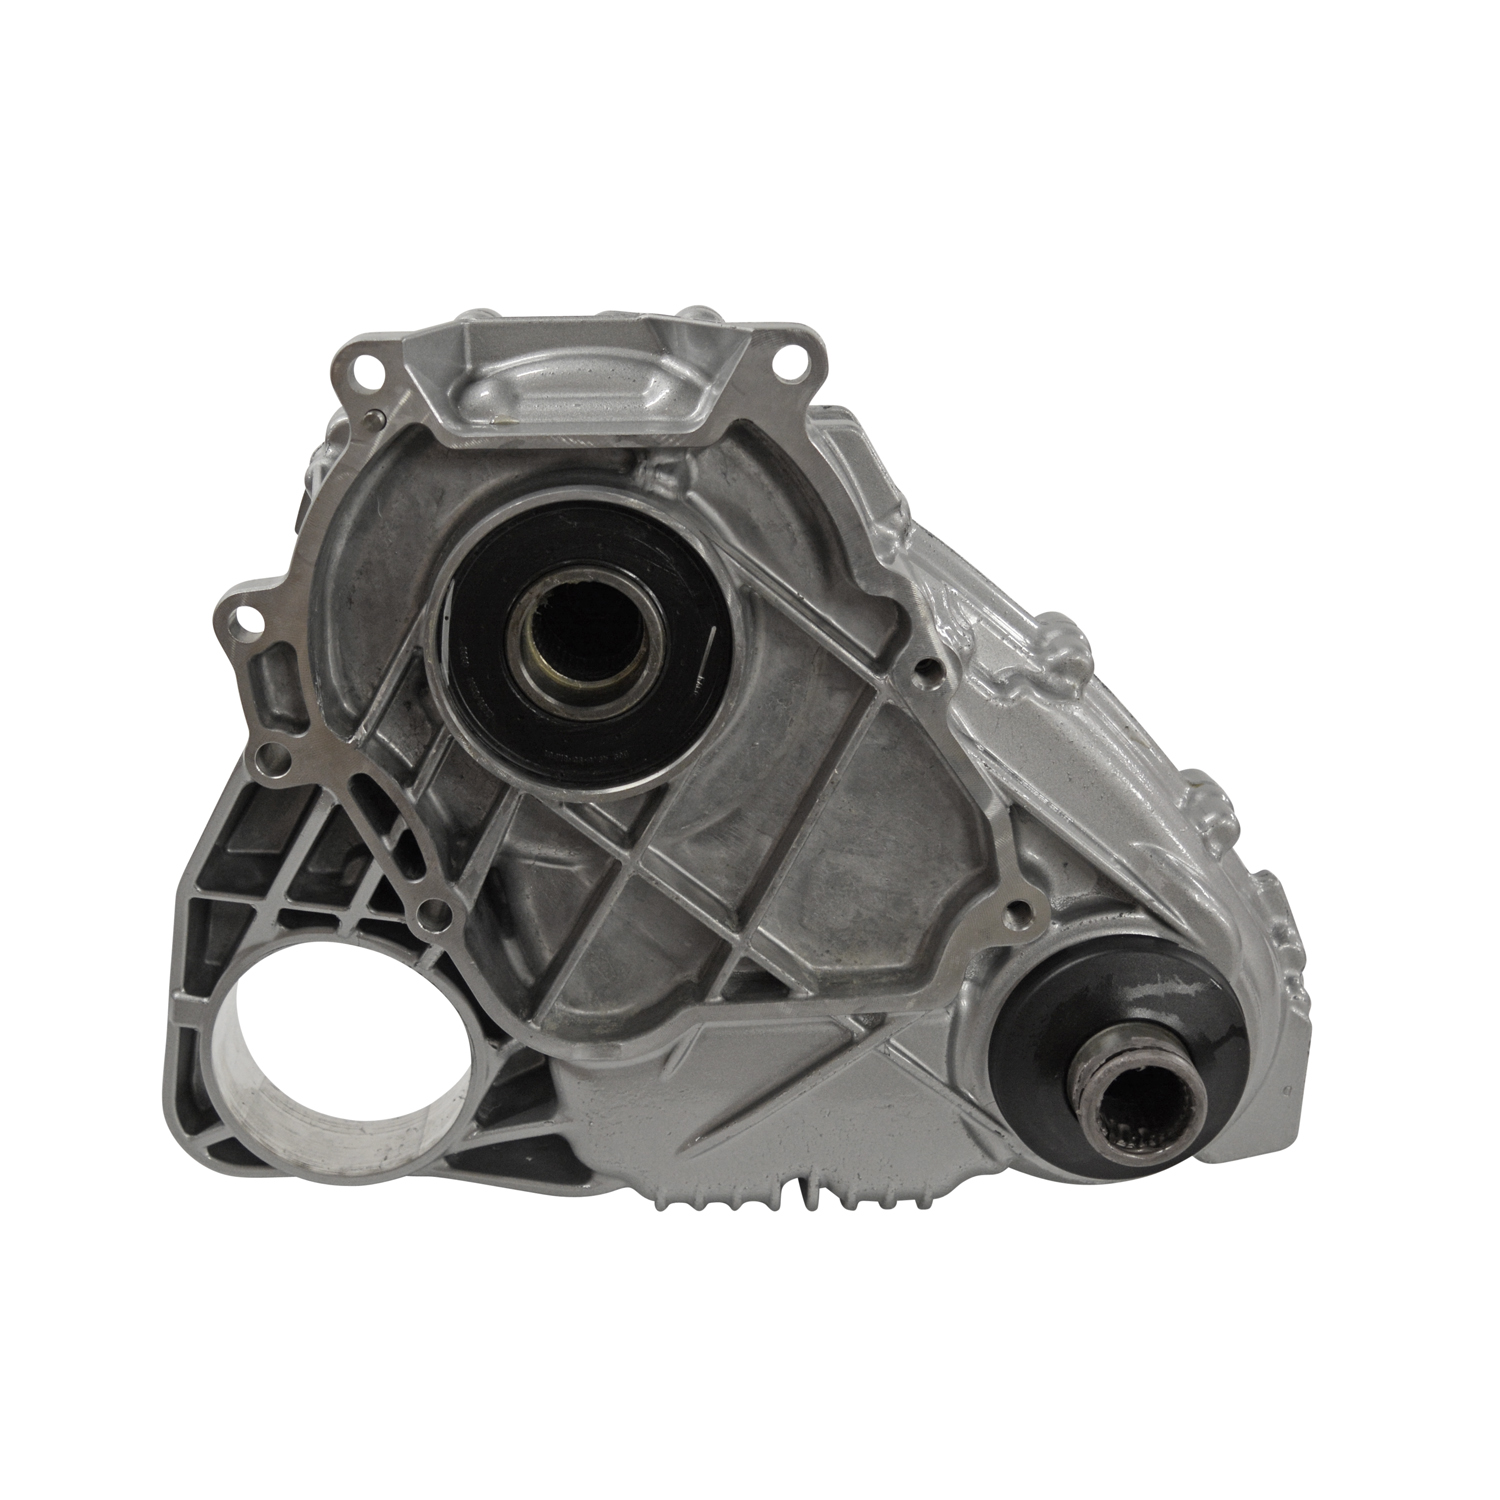 Remanufactured ATC450 Transfer Case Assembly, 2011 BMW X3 with Automatic Transmission